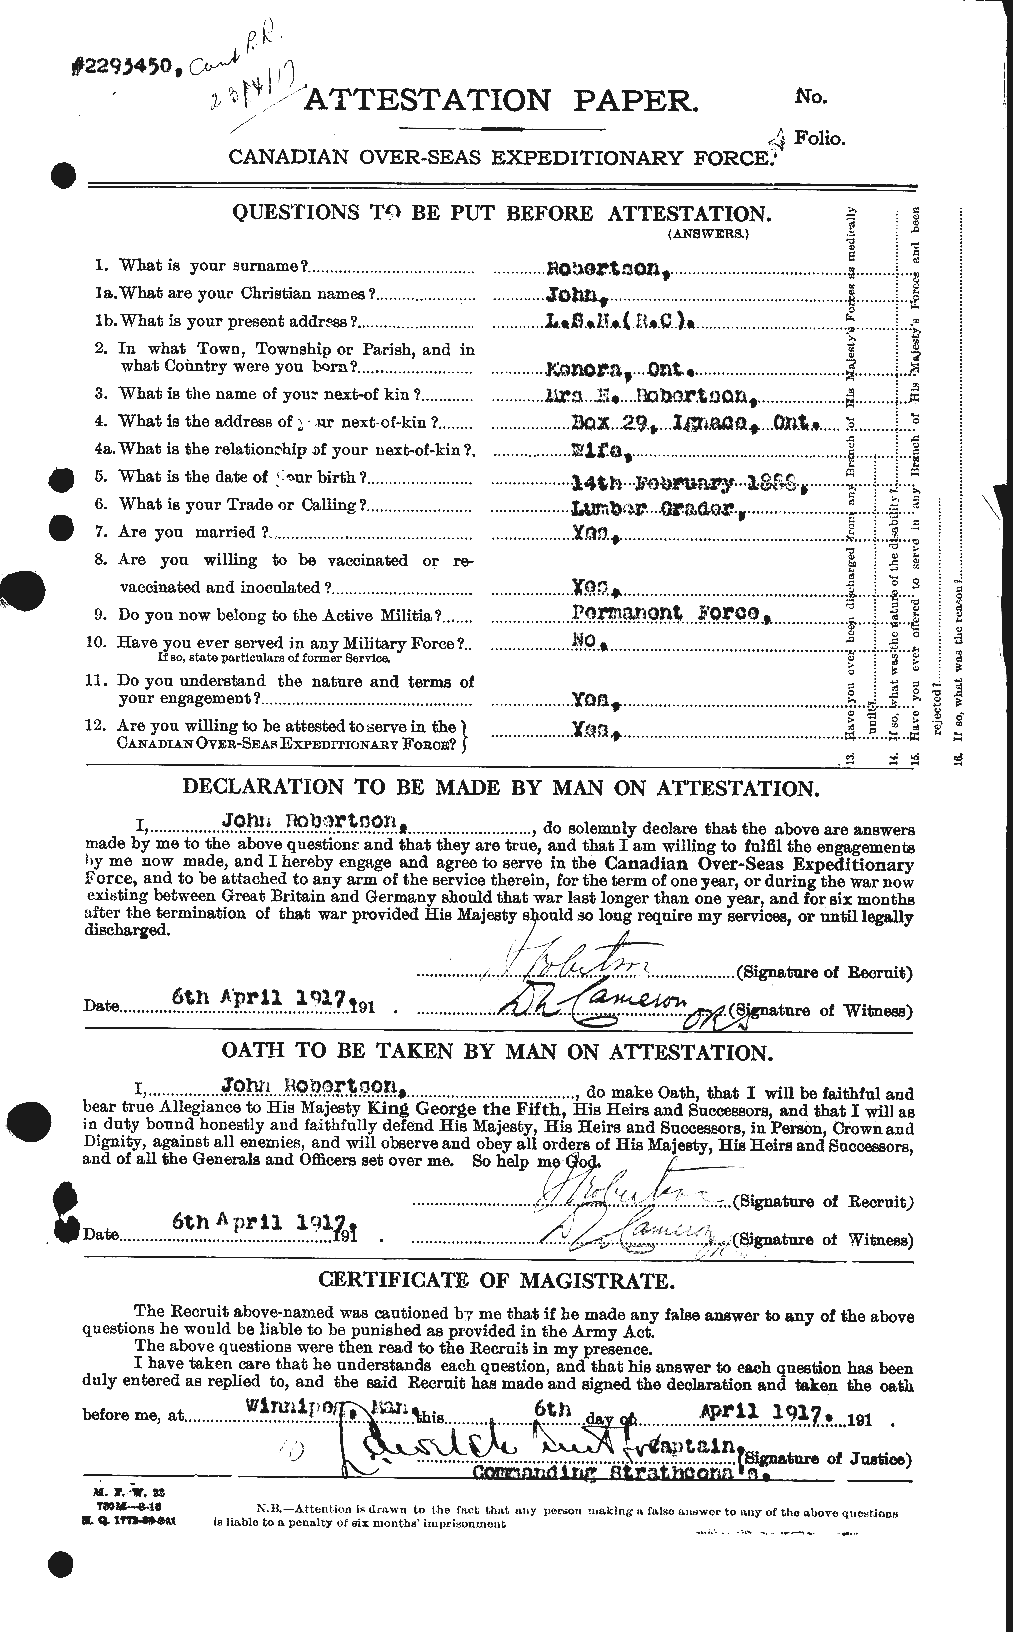 Personnel Records of the First World War - CEF 608740a